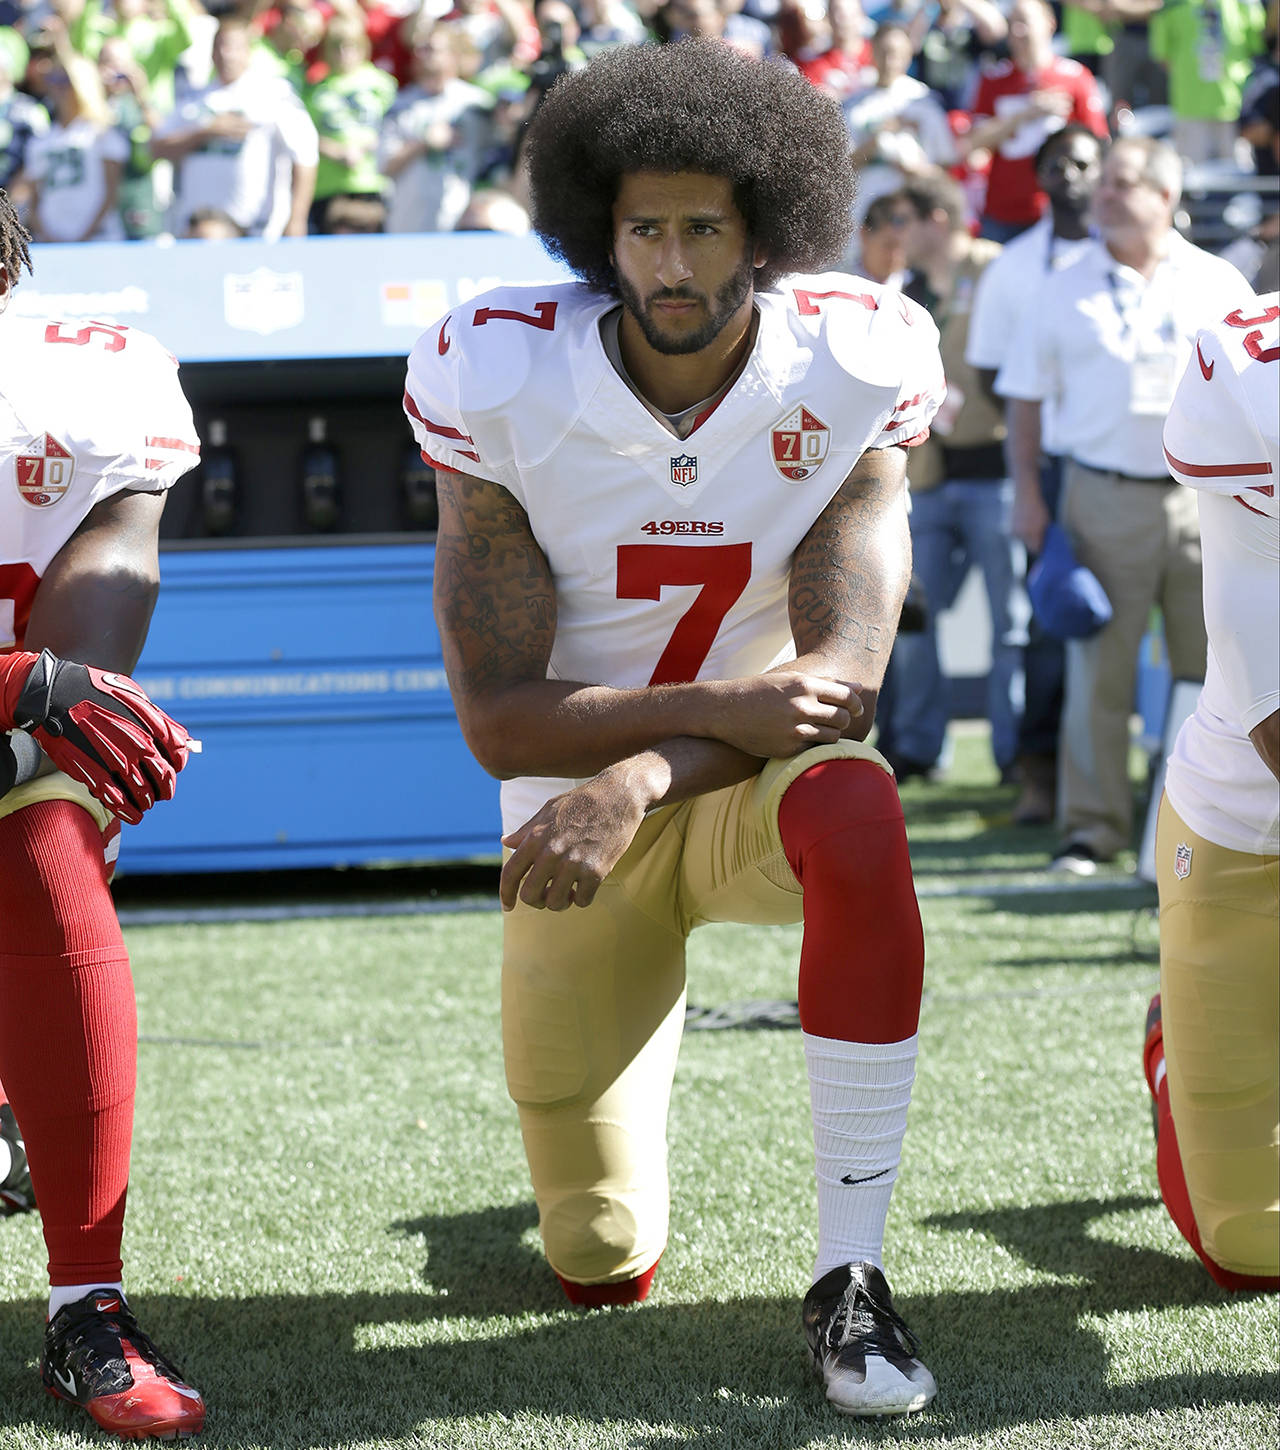 In this Sept. 25, 2016 photo, San Francisco 49ers’ Colin Kaepernick kneels during the national anthem before an NFL football game against the Seattle Seahawks, in Seattle. (AP Photo/Ted S. Warren, File)